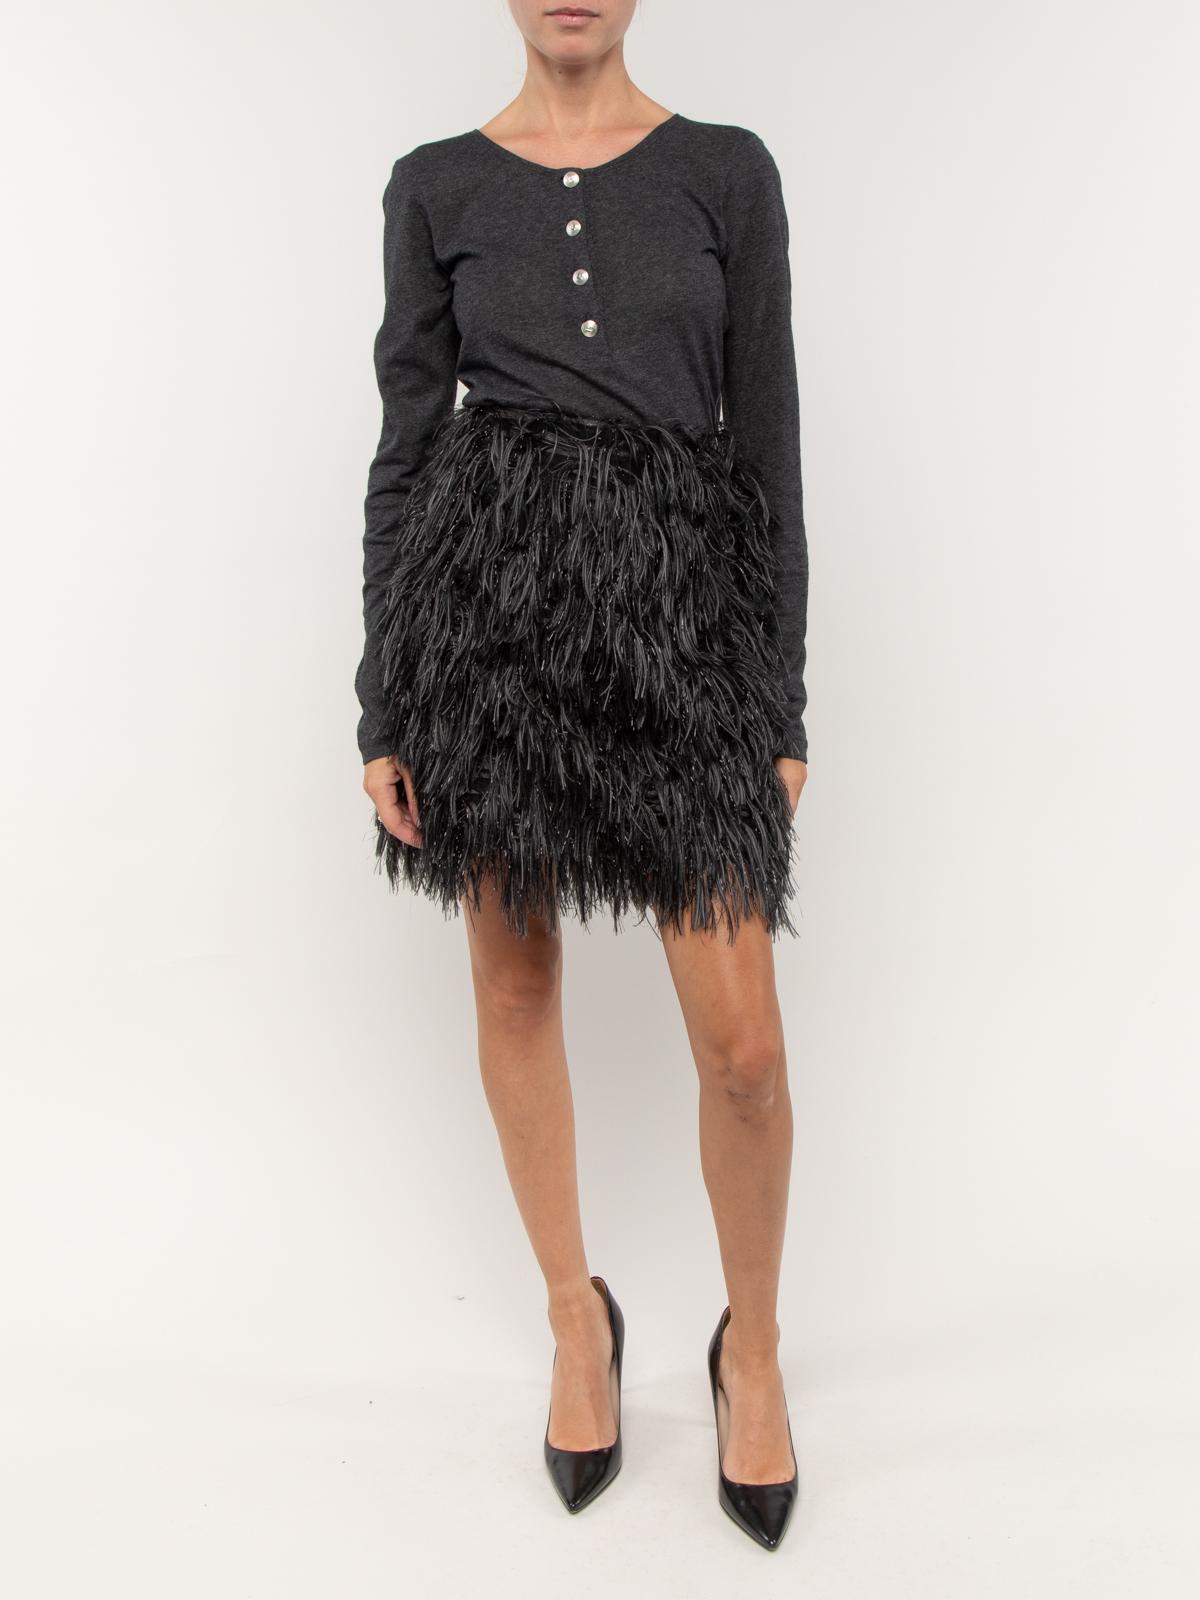 CONDITION is Good Feathers not as full near the top end of the skirt. Details Glitter detail Feather like texture River 2014 collection Zip up fastening on the side Made in France Composition 88% Polyester, 12% Silk Care instructions: Professional